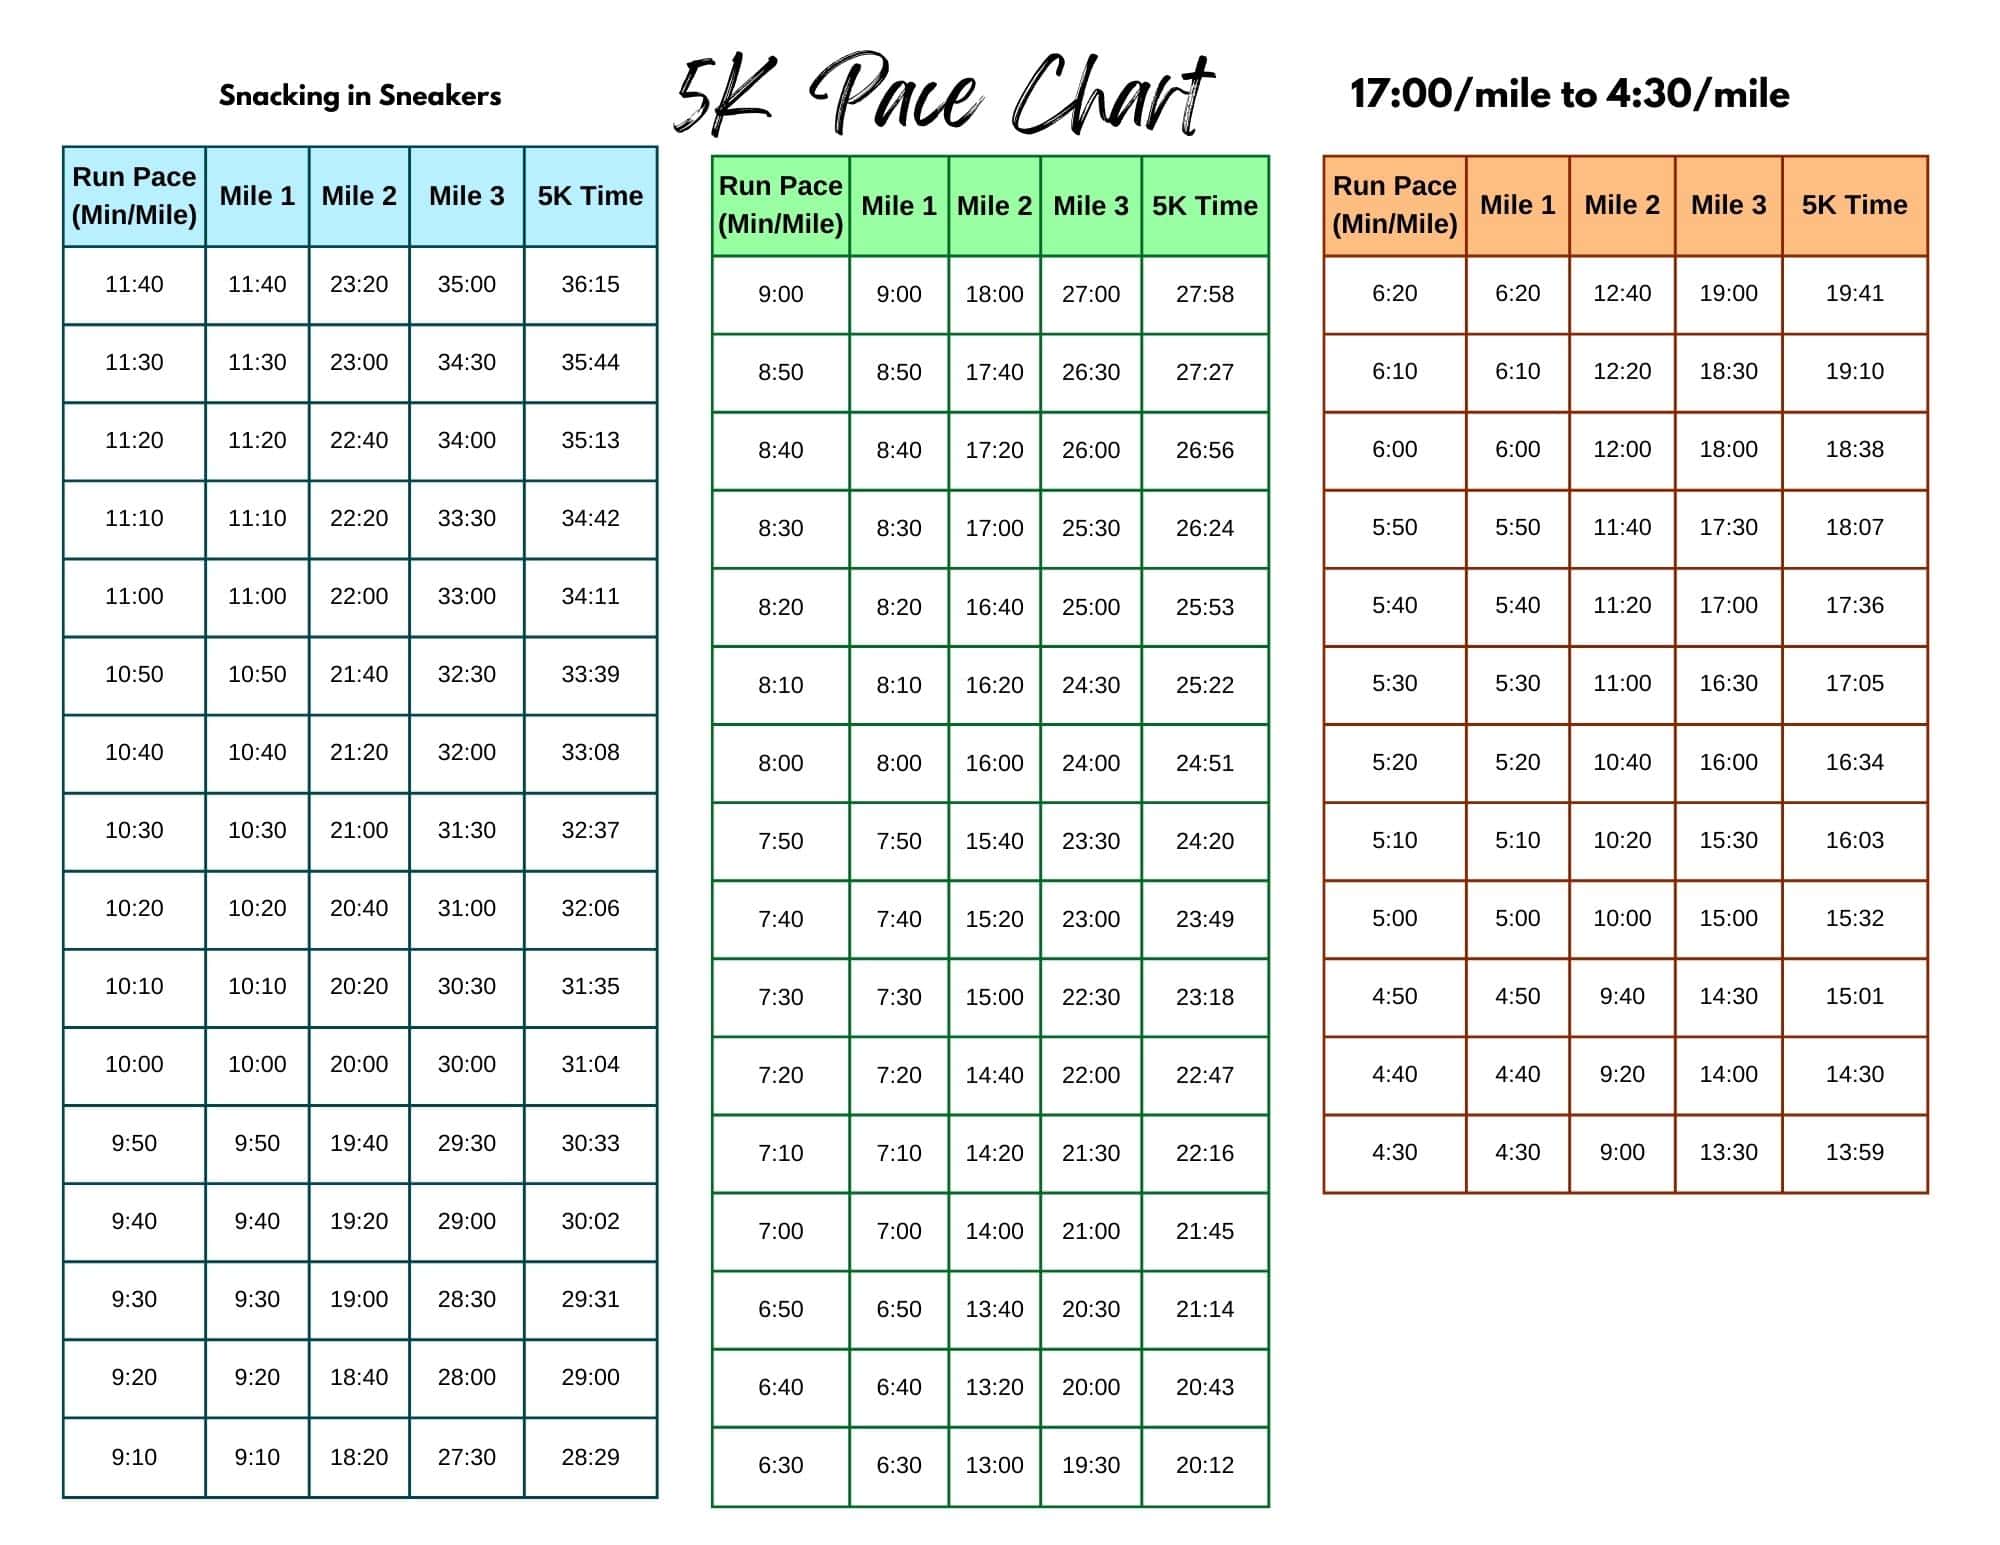 The second half of a 5K pace chart.